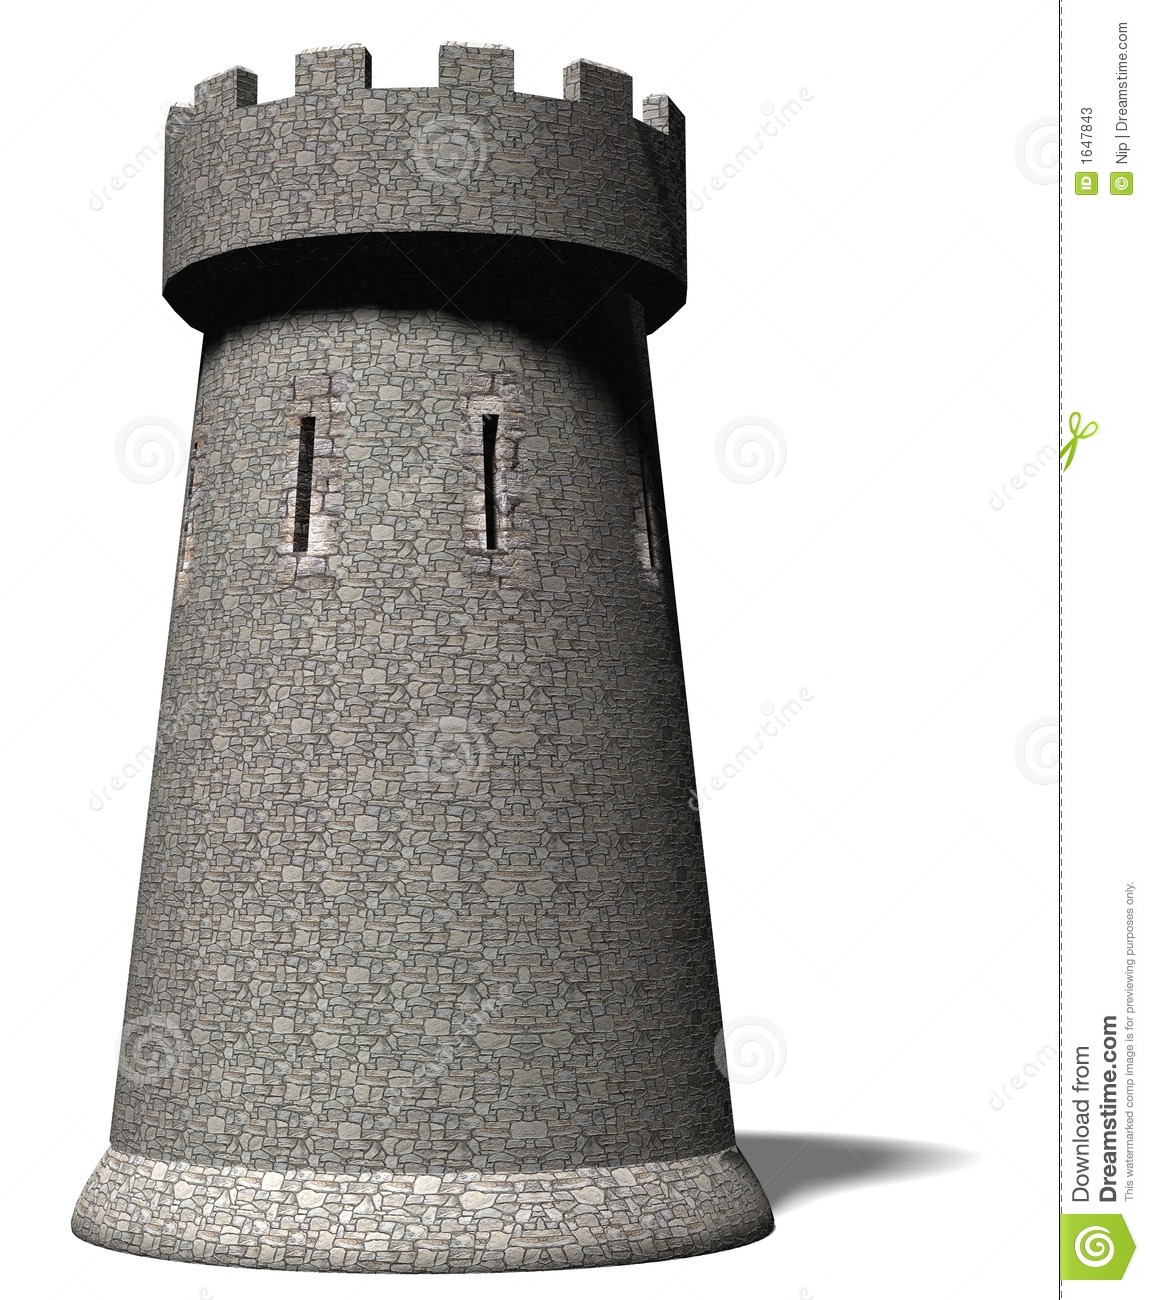 Castle Tower Rendered In 3d On A White Backround